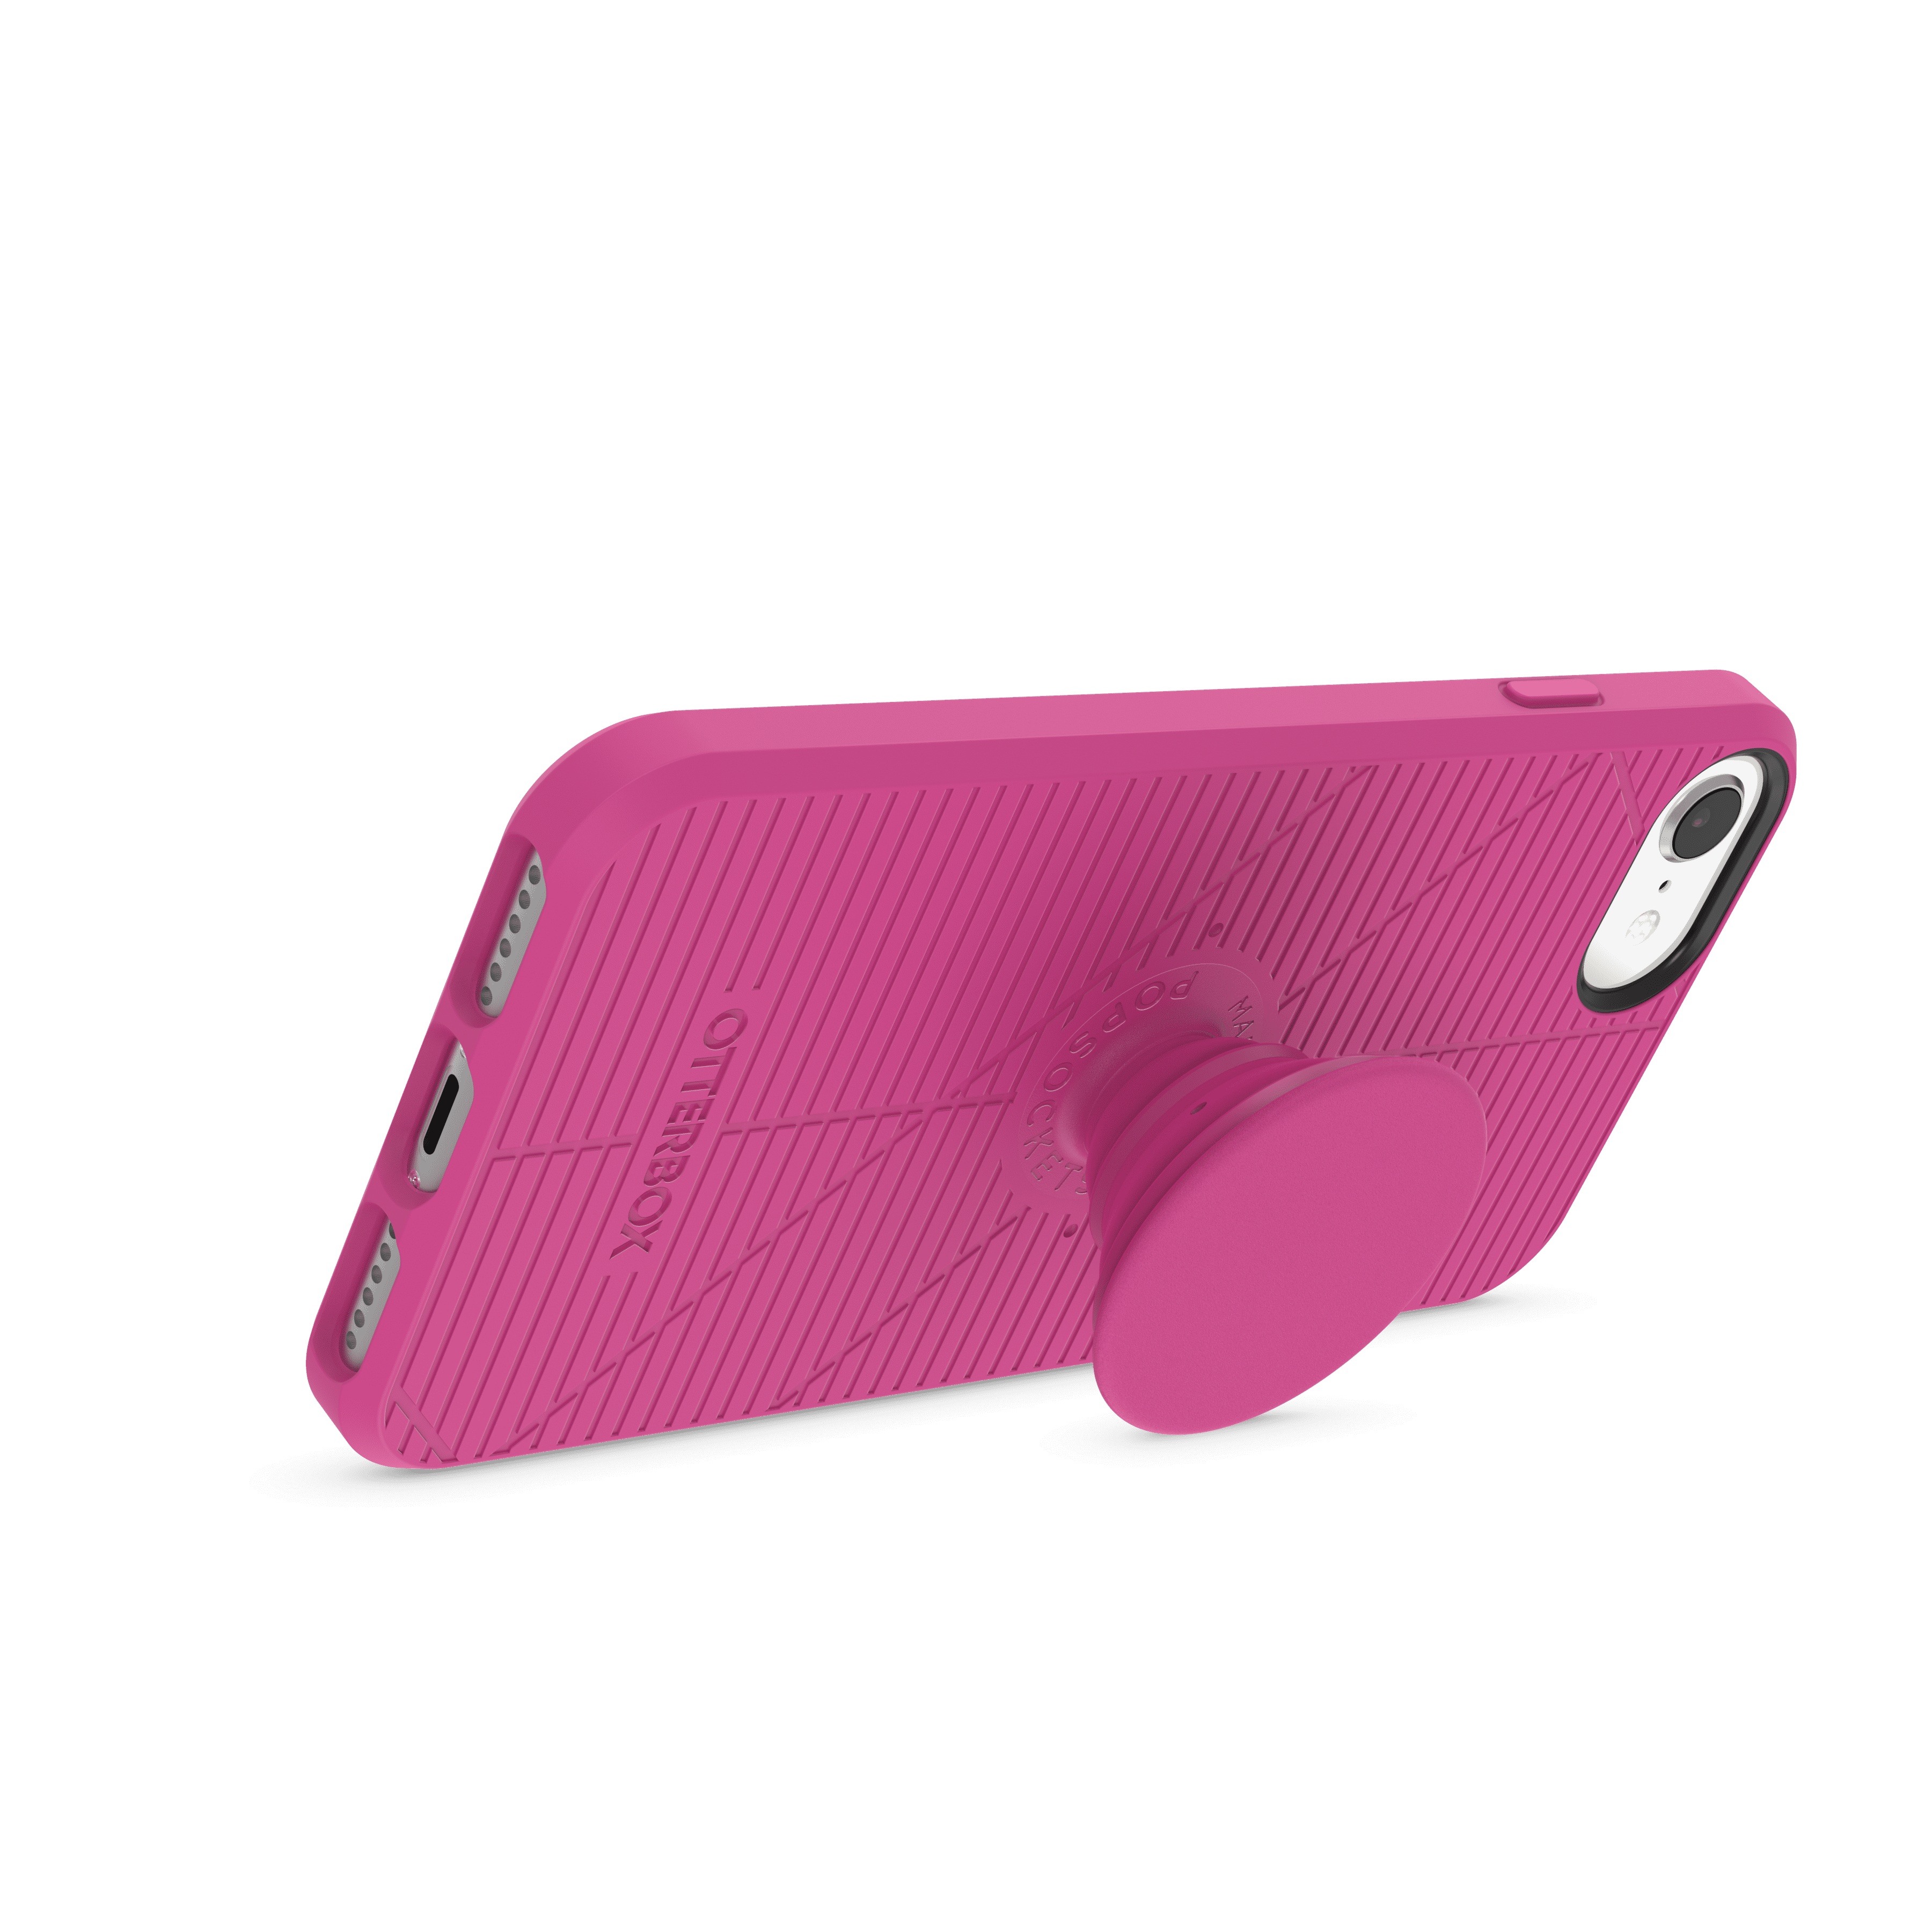 OtterBox 2nd Generation Otter + Pop Symmetry Series Case for Apple iPhone 7, 8 & SE